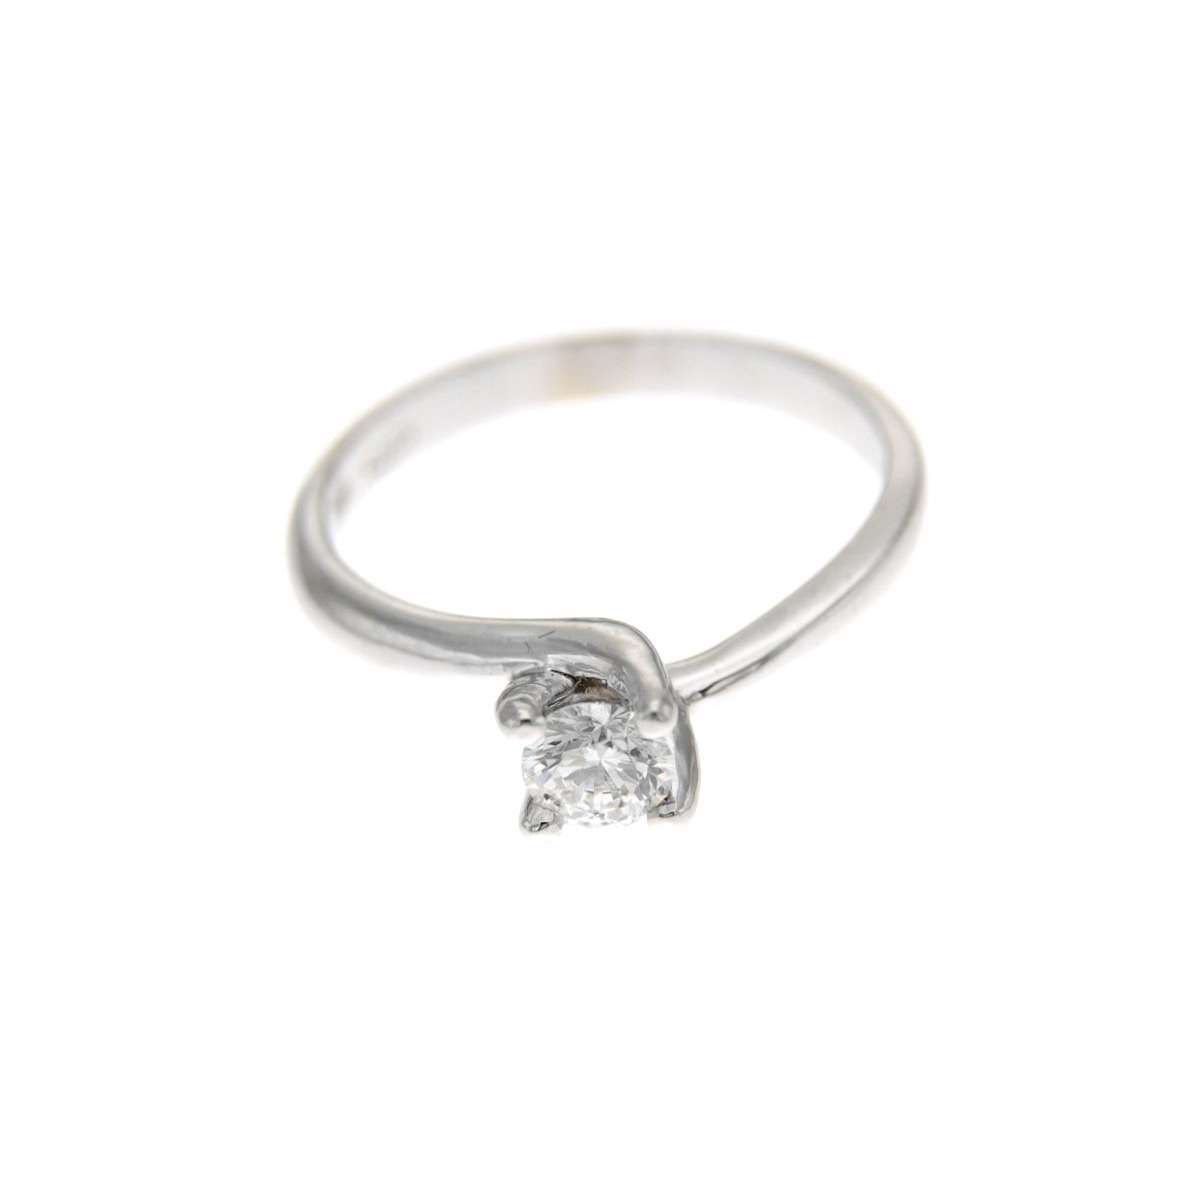 Valentino Solitaire Ring: 4 Prongs with 0.40 ct Diamond G-VS1